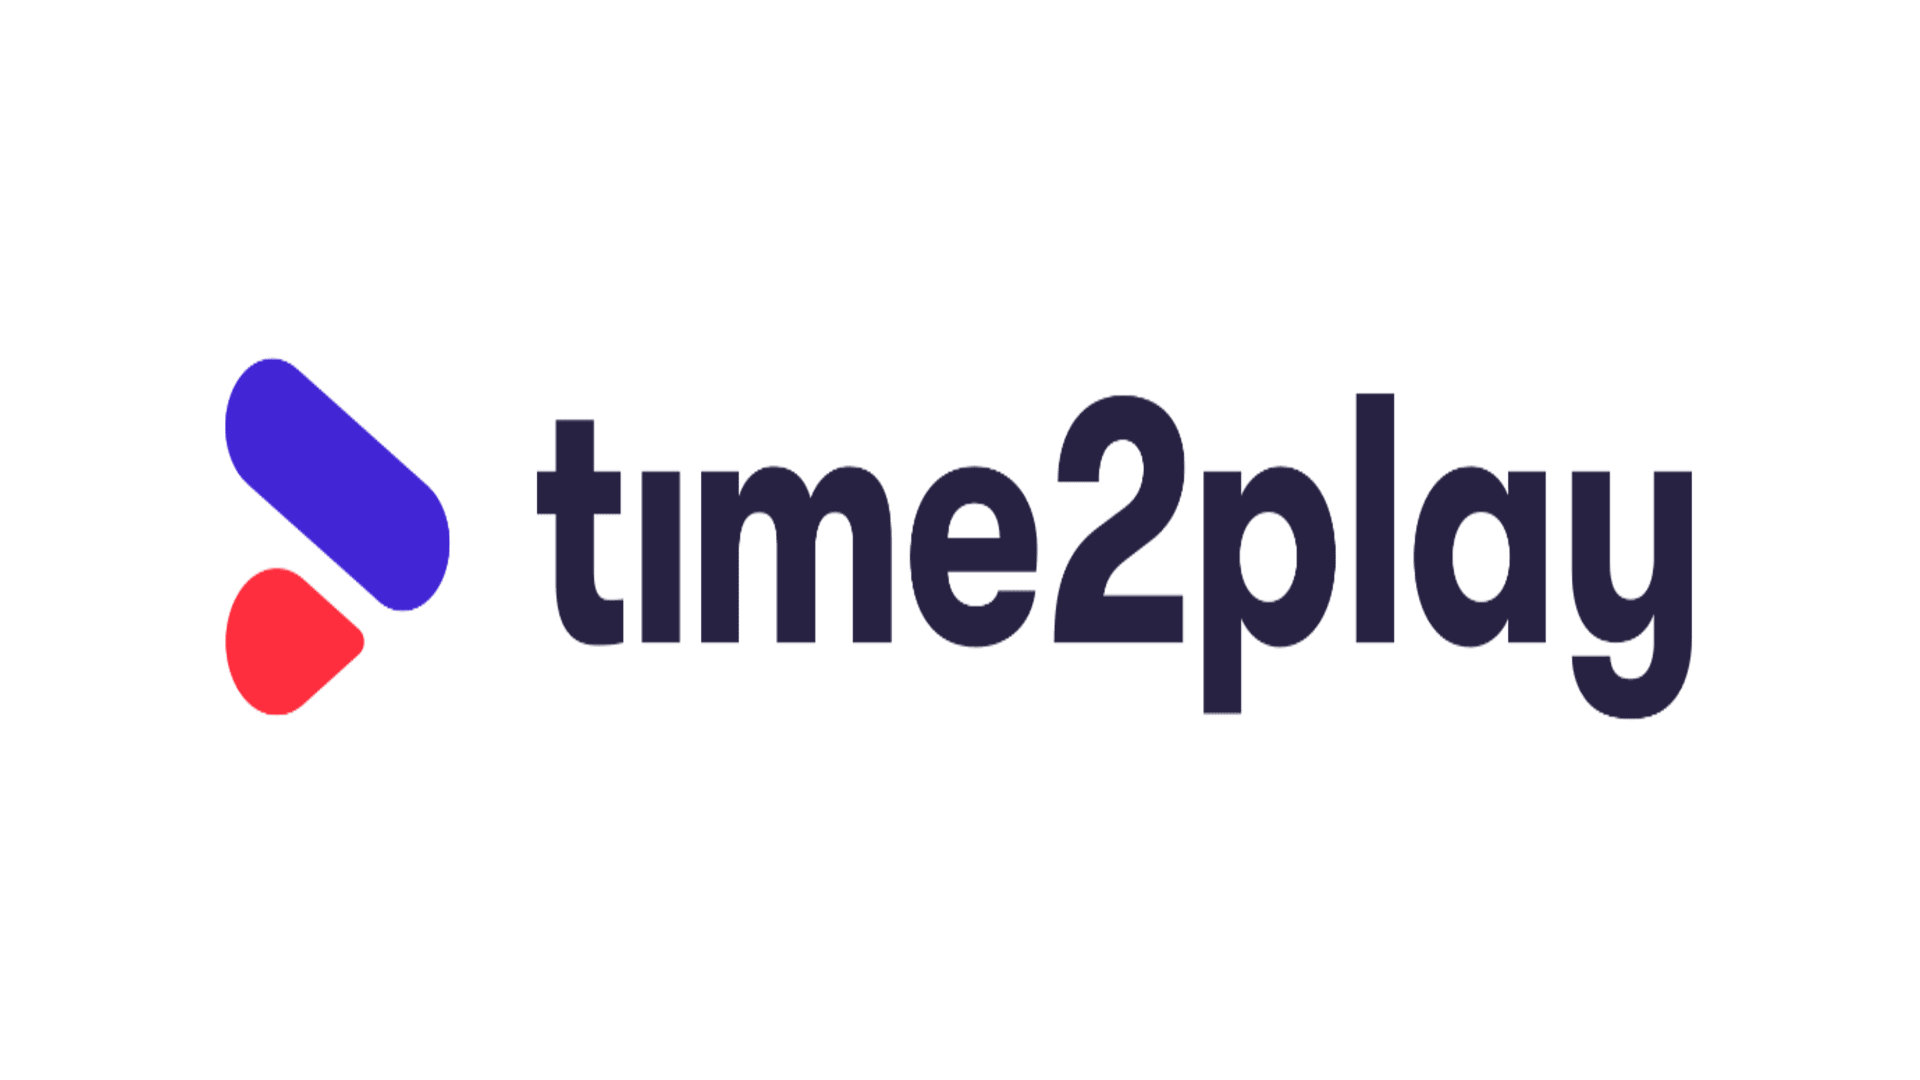 How Time2play is Revolutionizing Online Casino Reviews